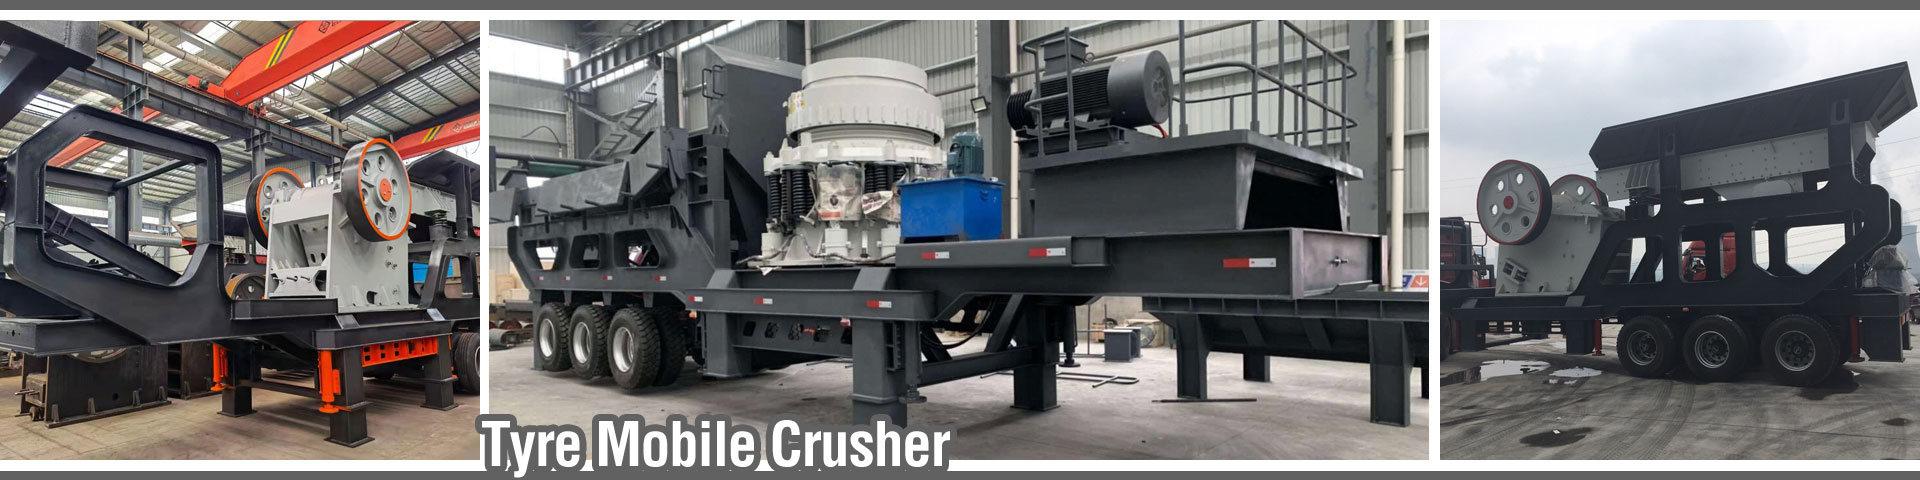 tyre mobile crusher plant